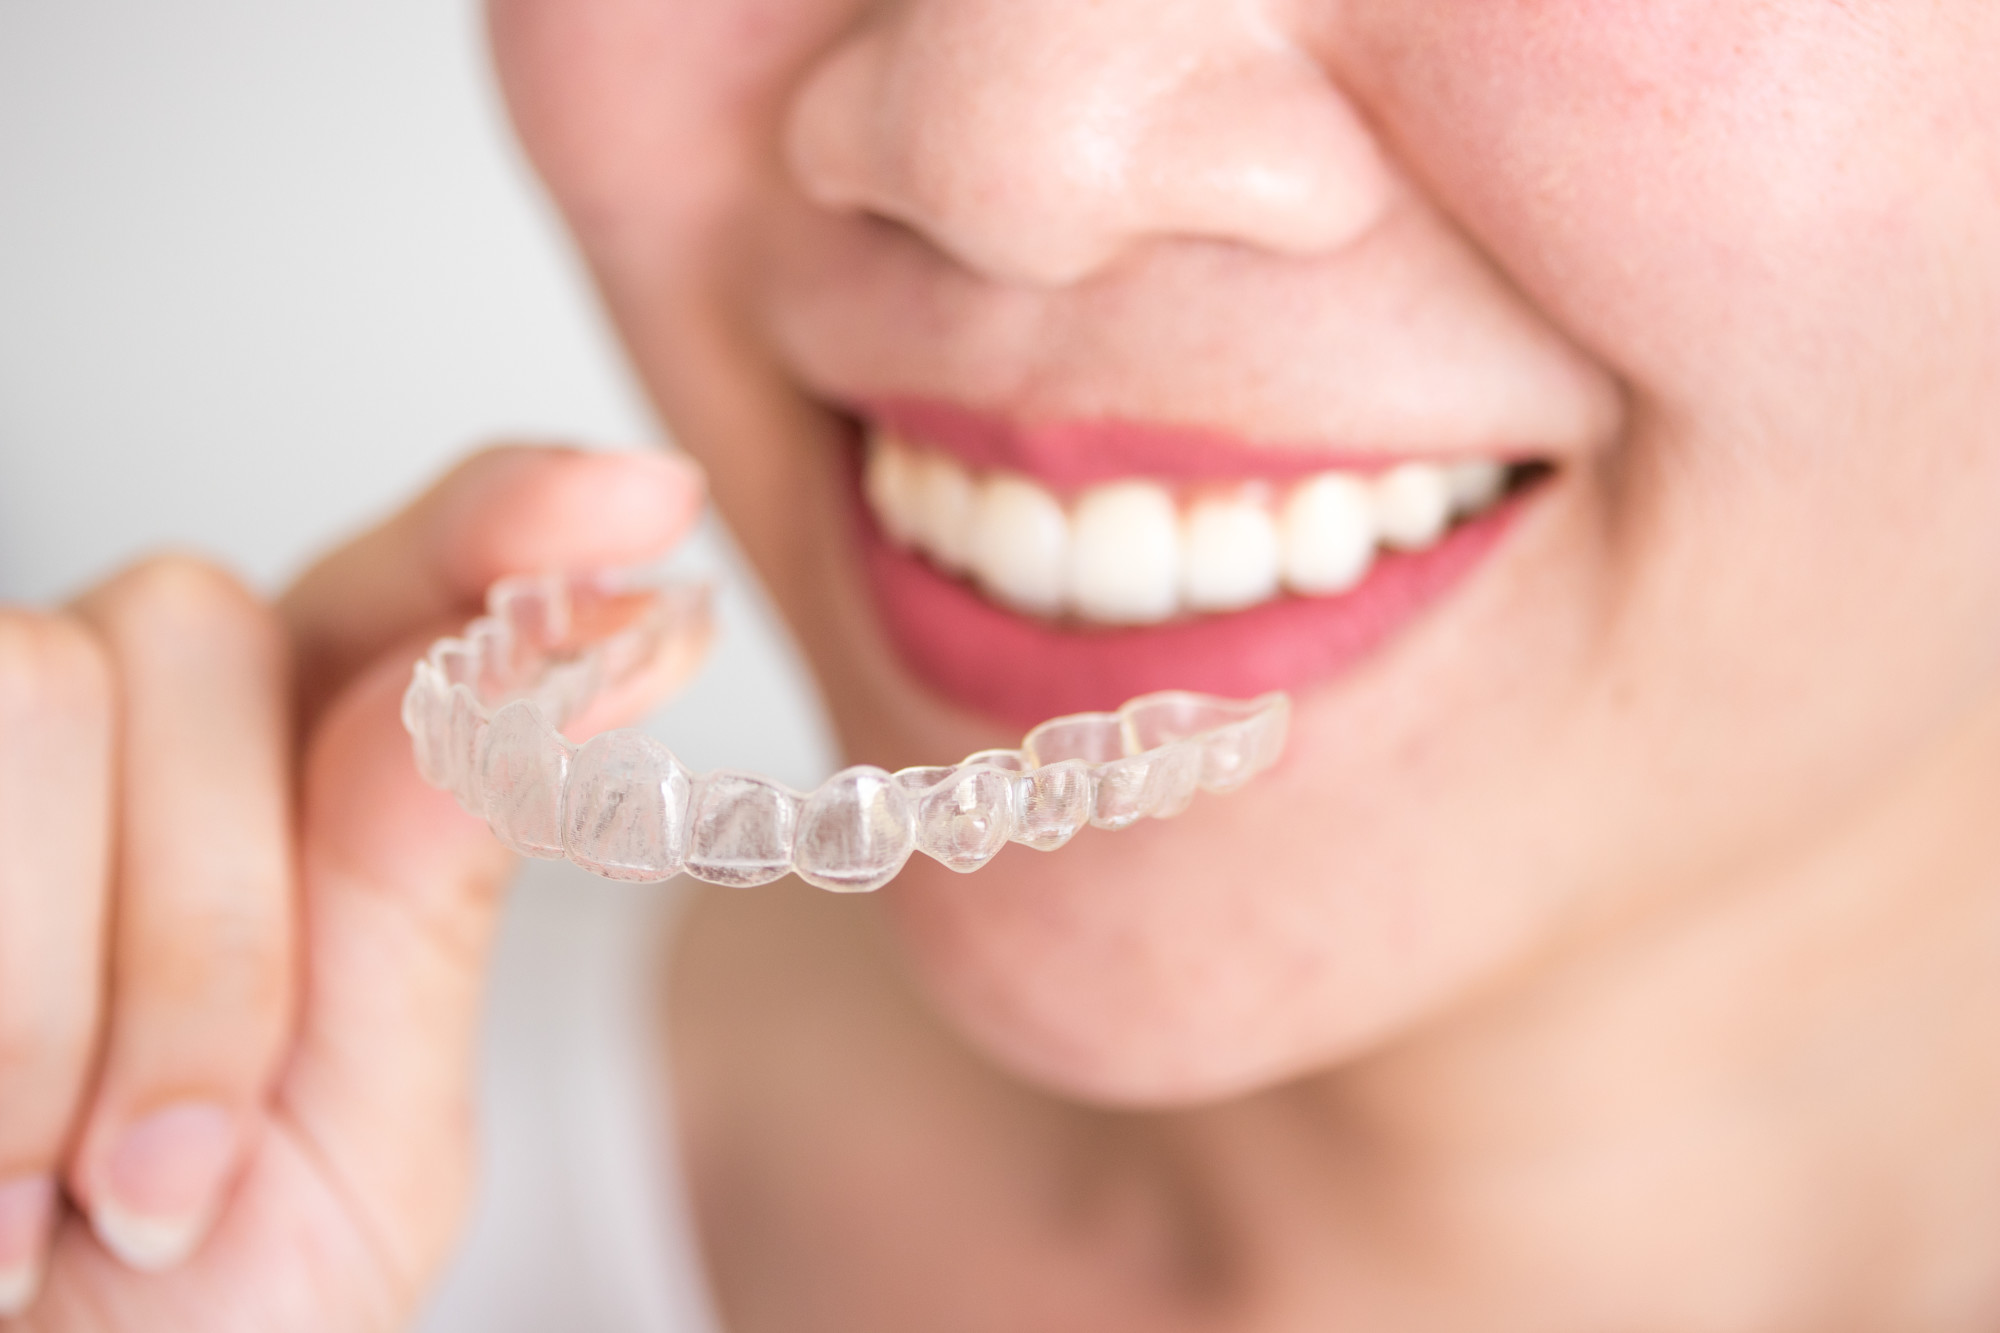 Are There Side Effects with Invisalign?